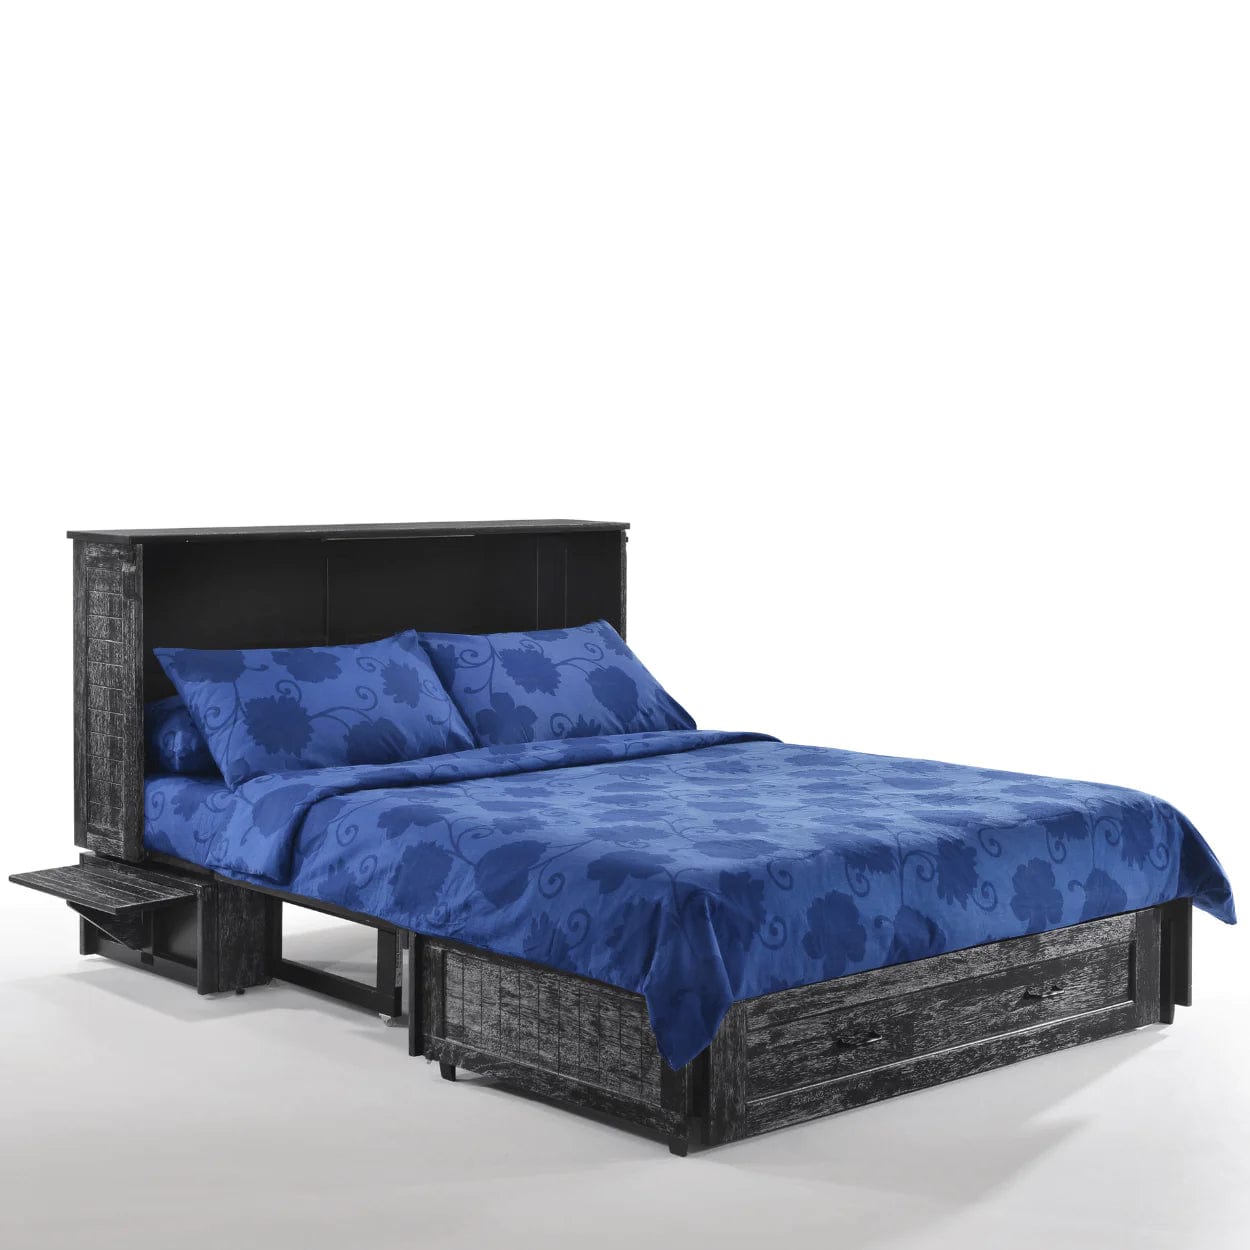 Night and Day Furniture Poppy Queen Murphy Cabinet Bed in Blizzard Finish with Mattress